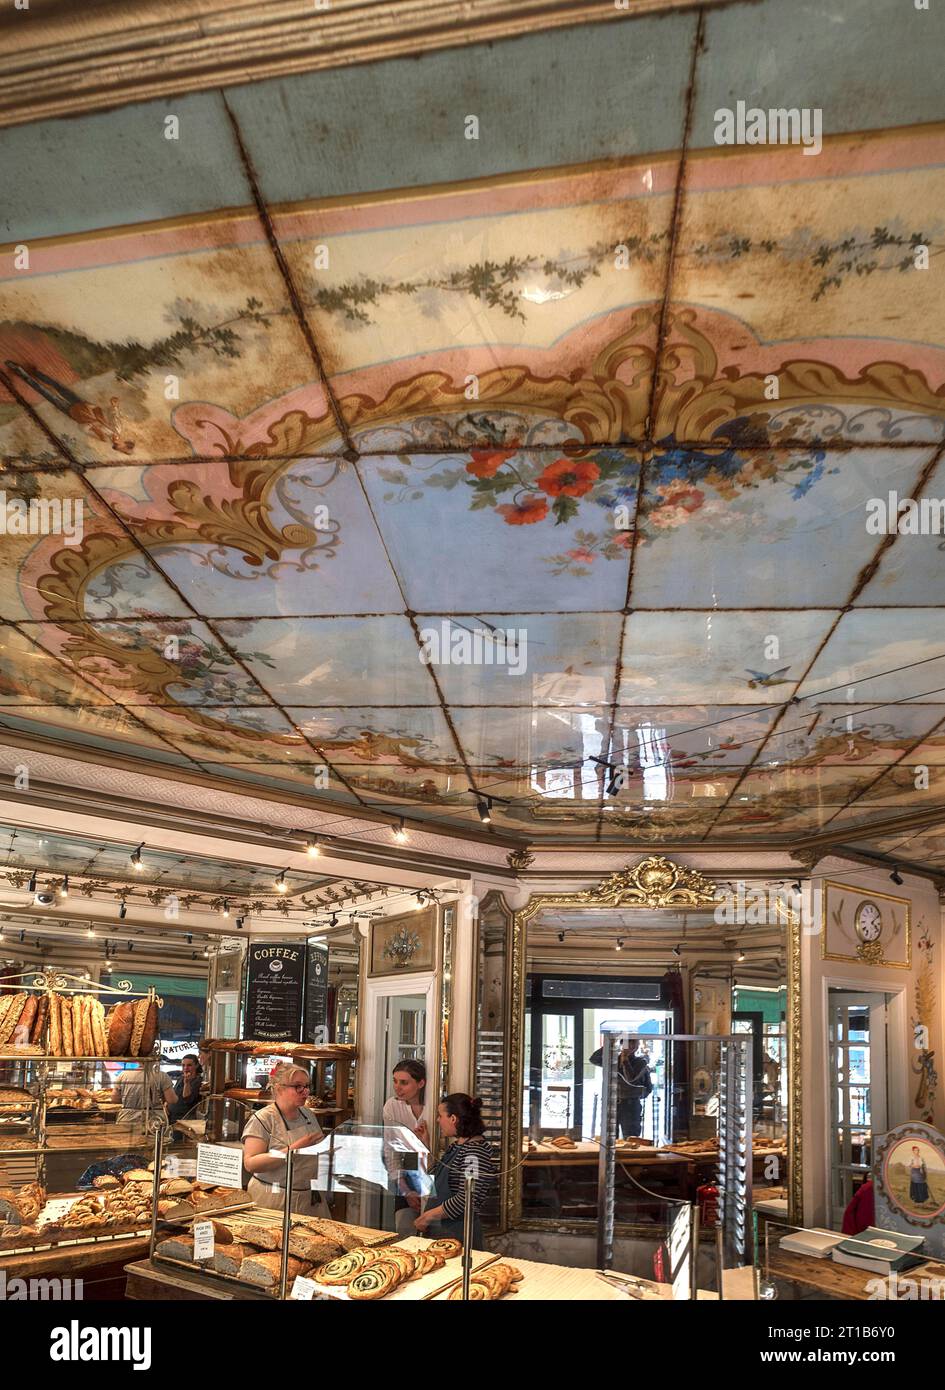 Historic bakery from 1875 with painted ceiling, Boulangerie La traditionnel. 34 Rue Yves Toudic, Paris, France Stock Photo